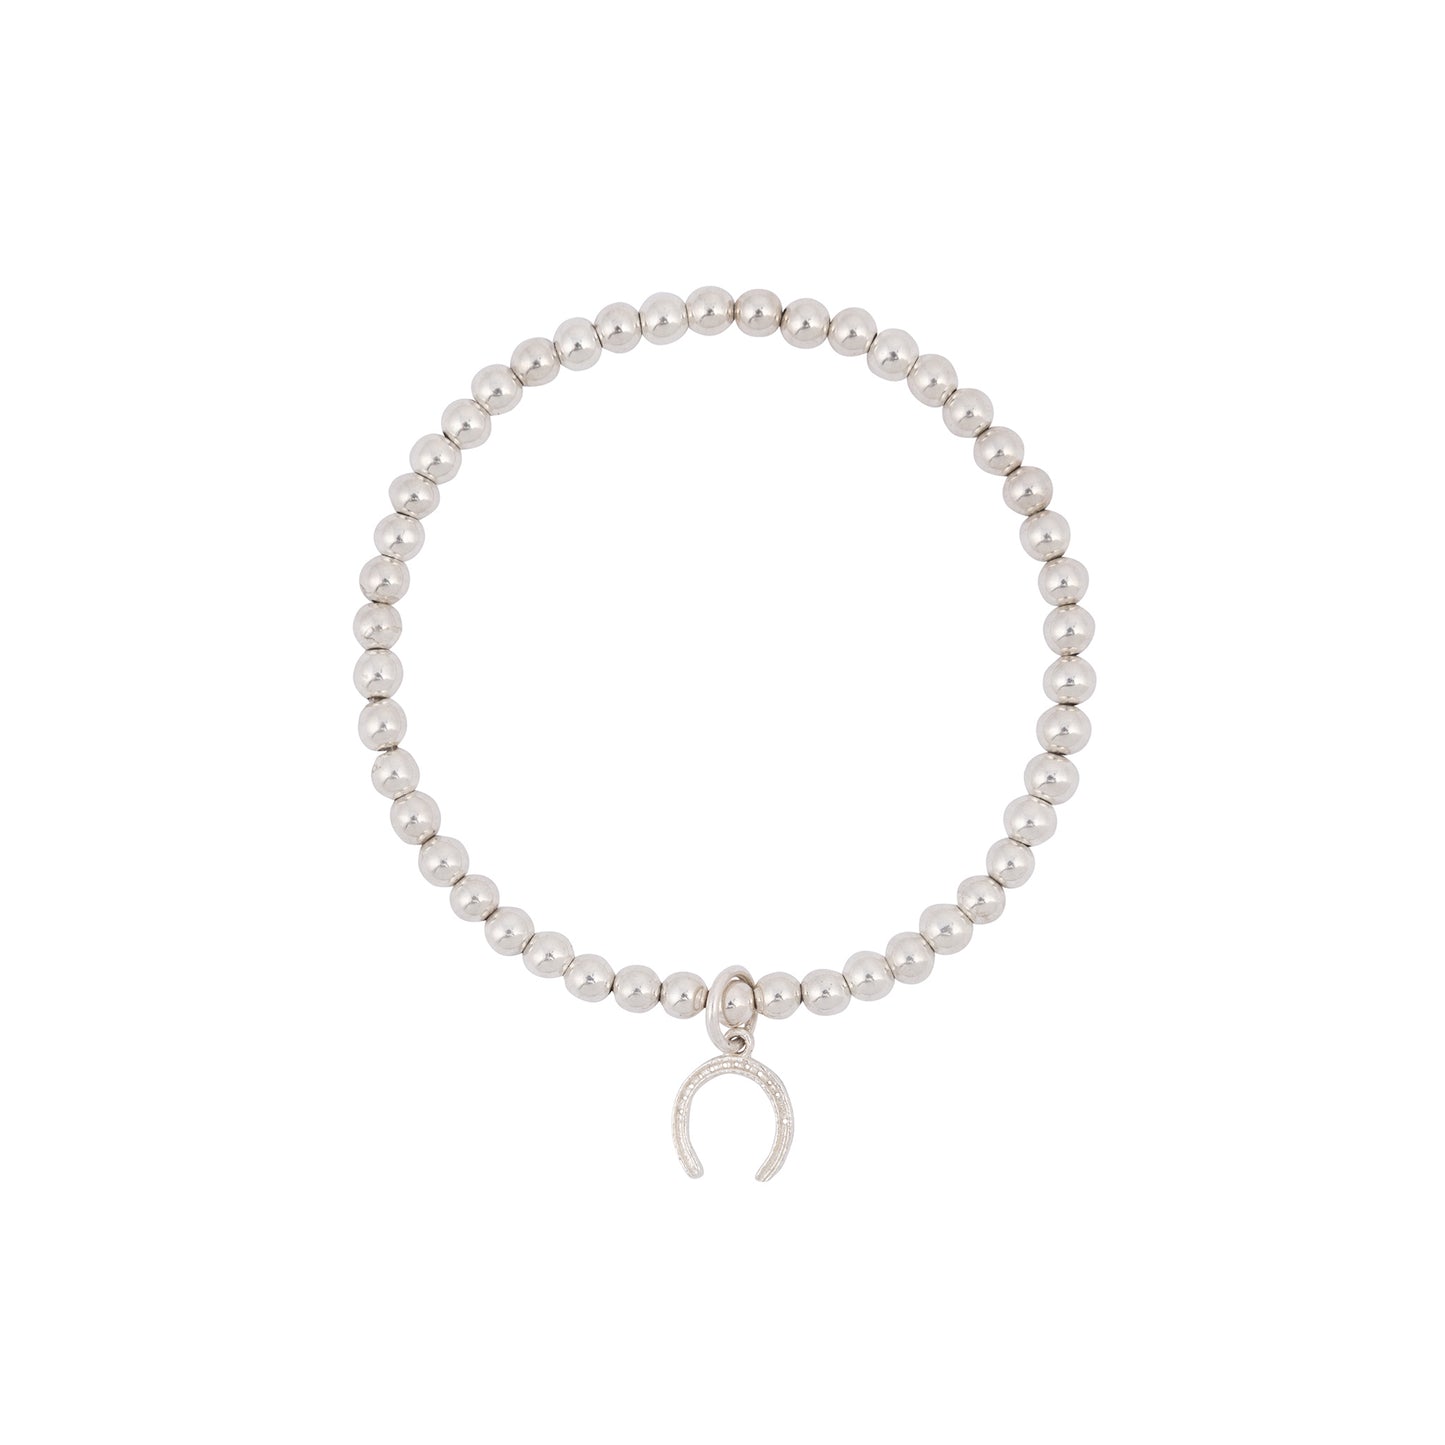 A silver beaded bracelet with evenly spaced spherical beads, featuring a small crescent moon-shaped charm hanging from it. The charm is attached to a round bead, adding a simple yet elegant detail to the design. This handmade Horse Bracelet by Made Here with Love is displayed on a white background.